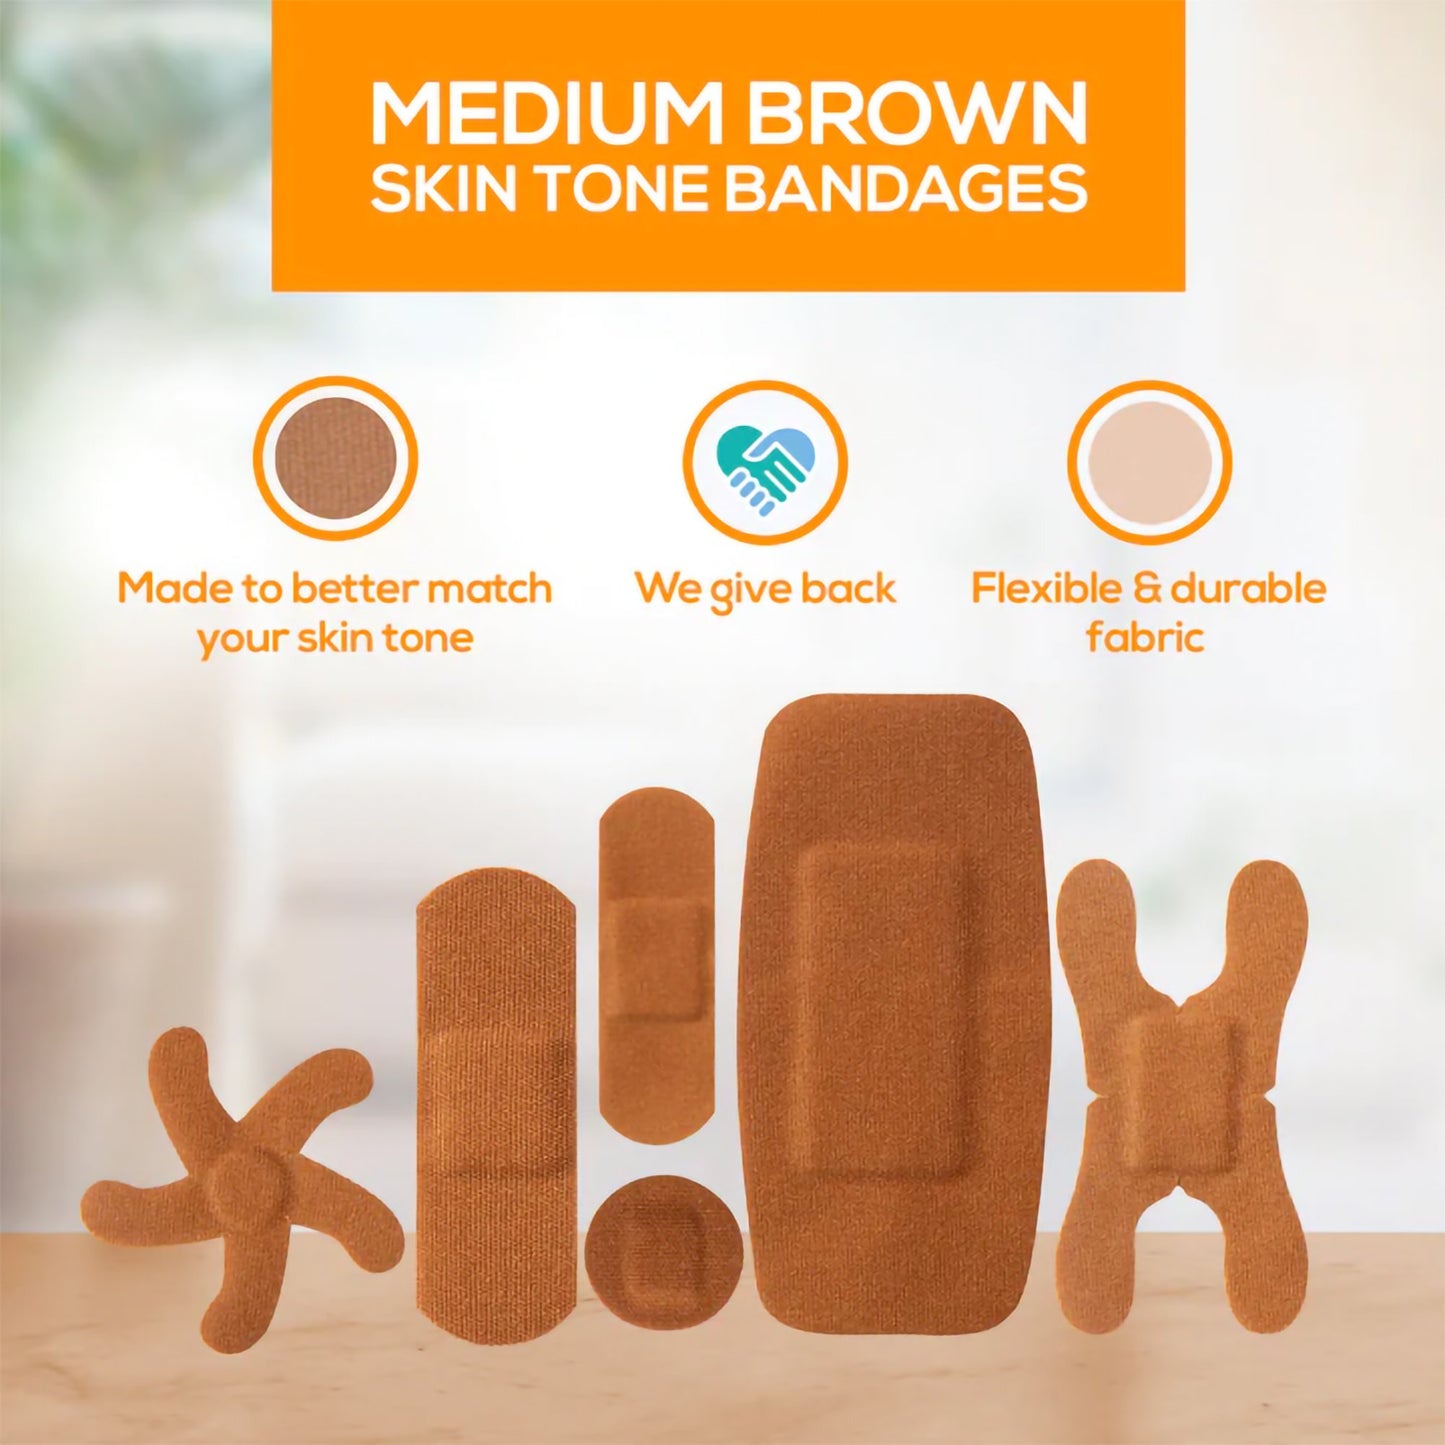 Tru-Colour Assorted Skin Tone Bandages for Brown Skin Tone Shades